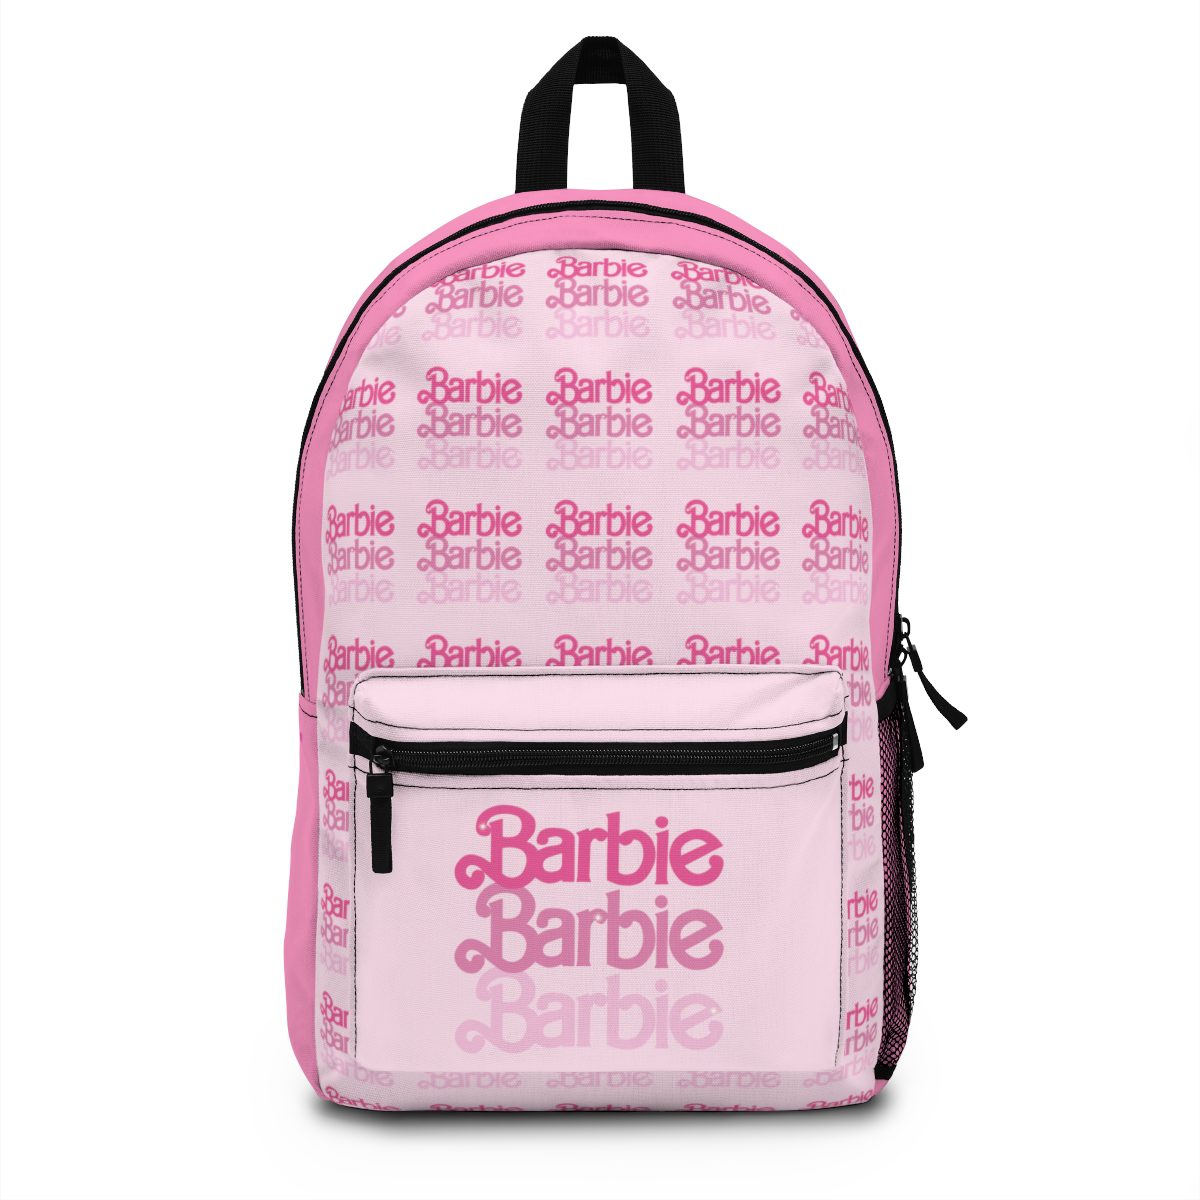 Pink Barbie Backpack with Iconic Logo – Fashionable and Functional Cool Kiddo